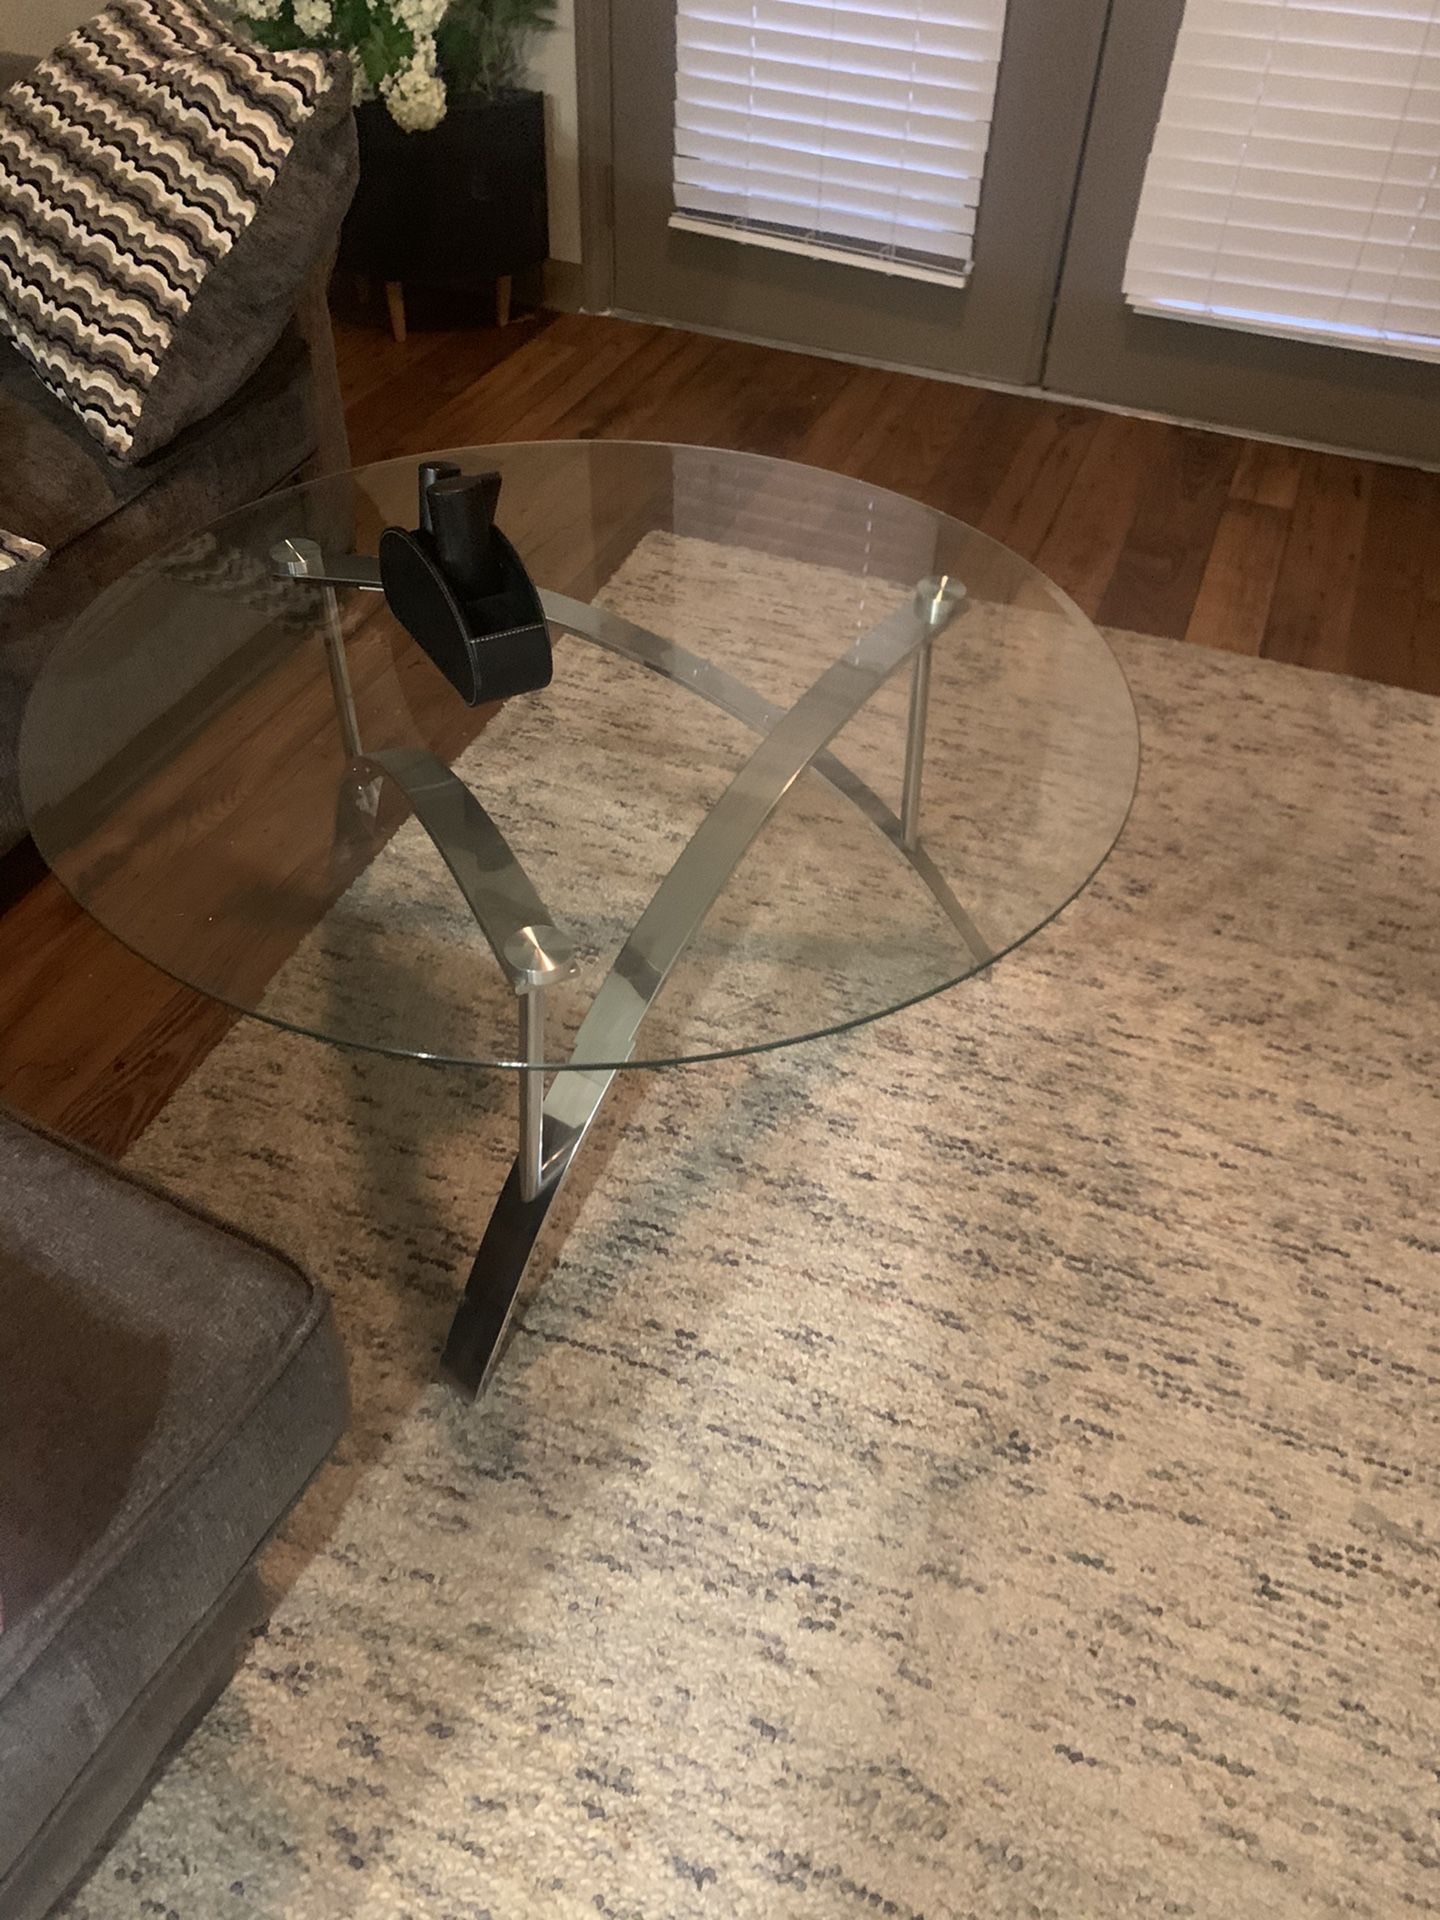 Coffee center table